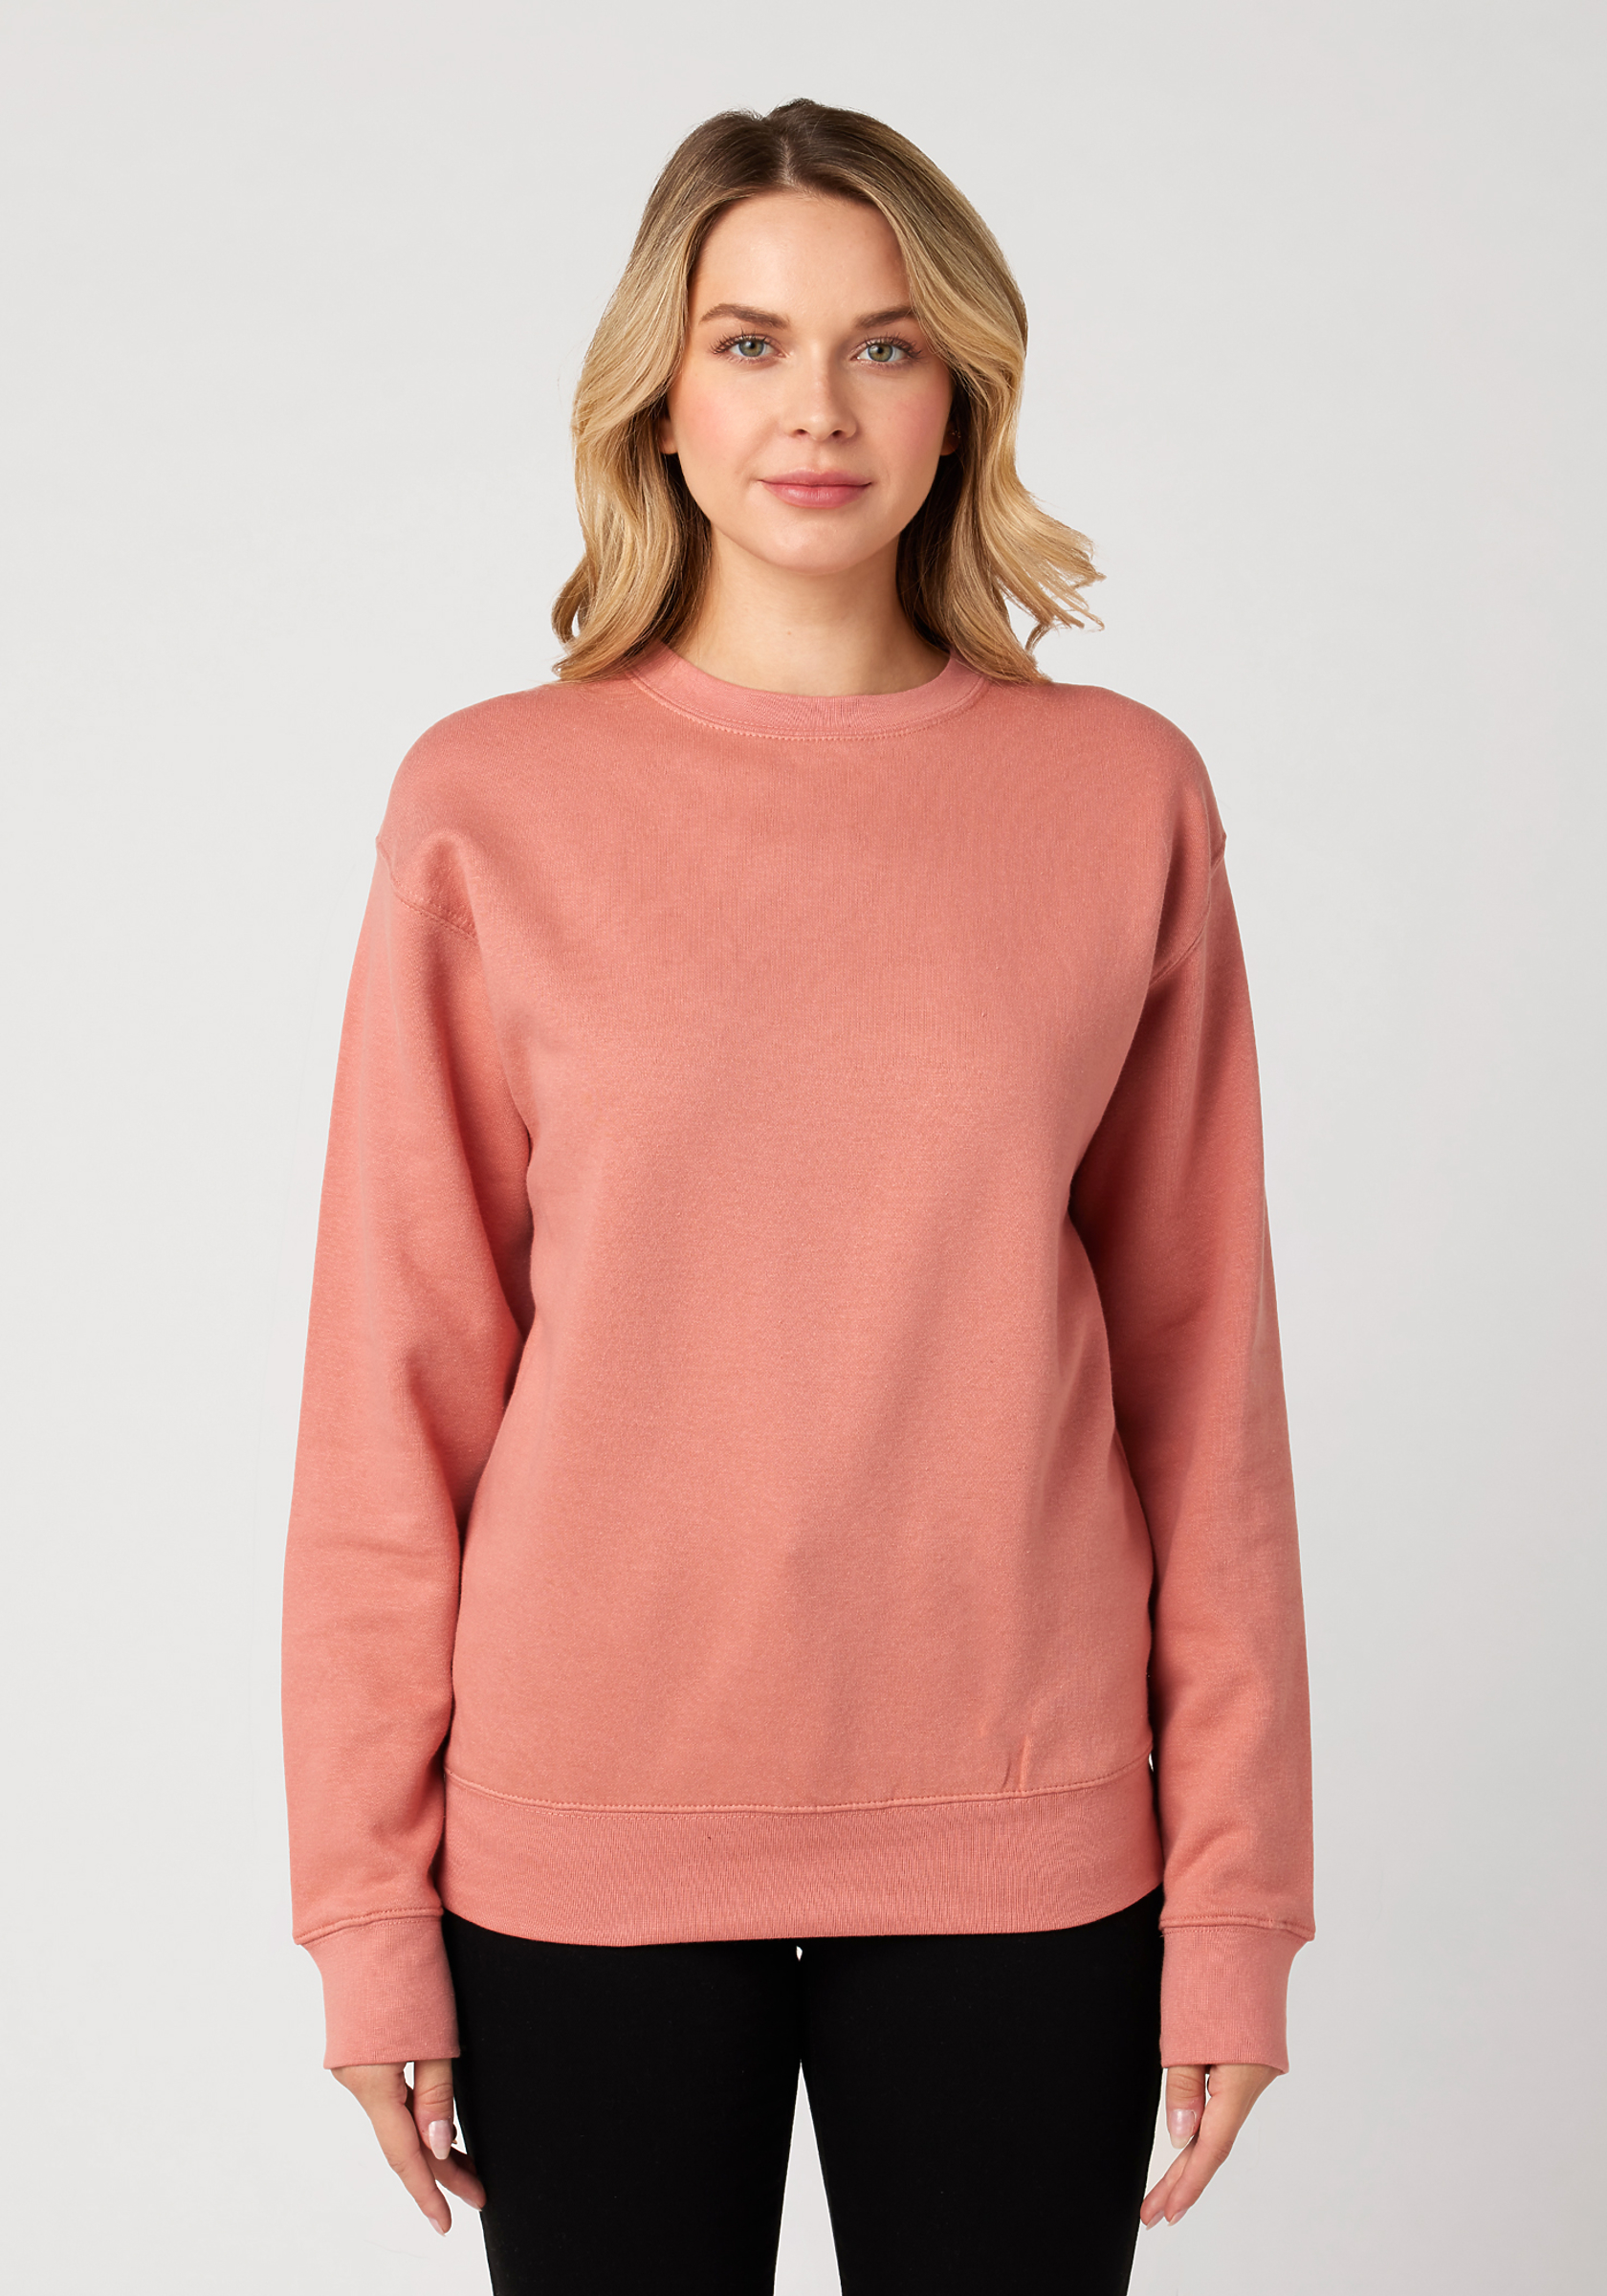 Vintage Specially Dyed Crew-Neck Sweatshirt for Women